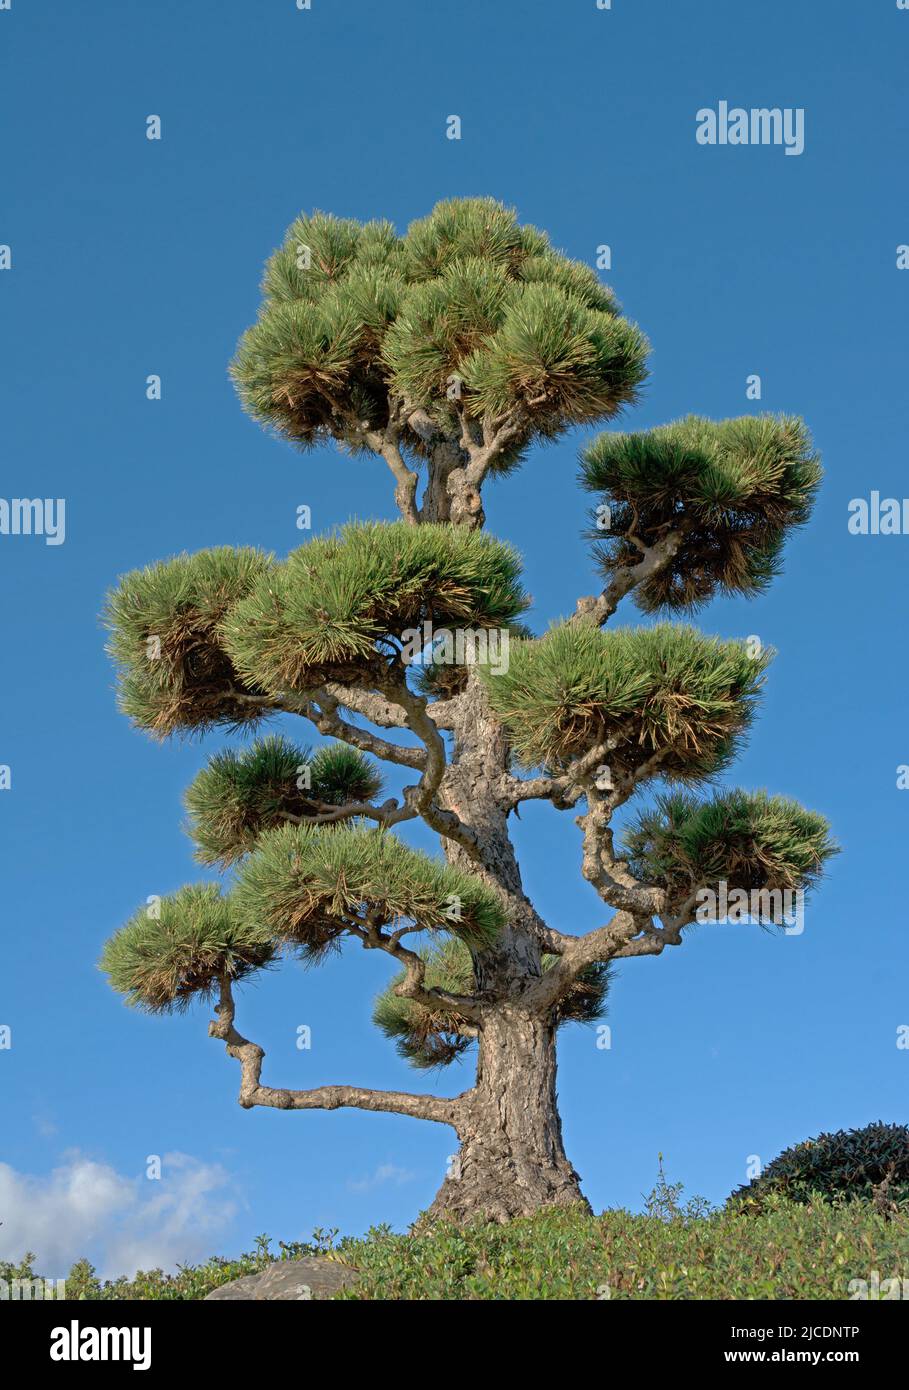 Pine or black pine, also called fluffy pine tree Stock Photo